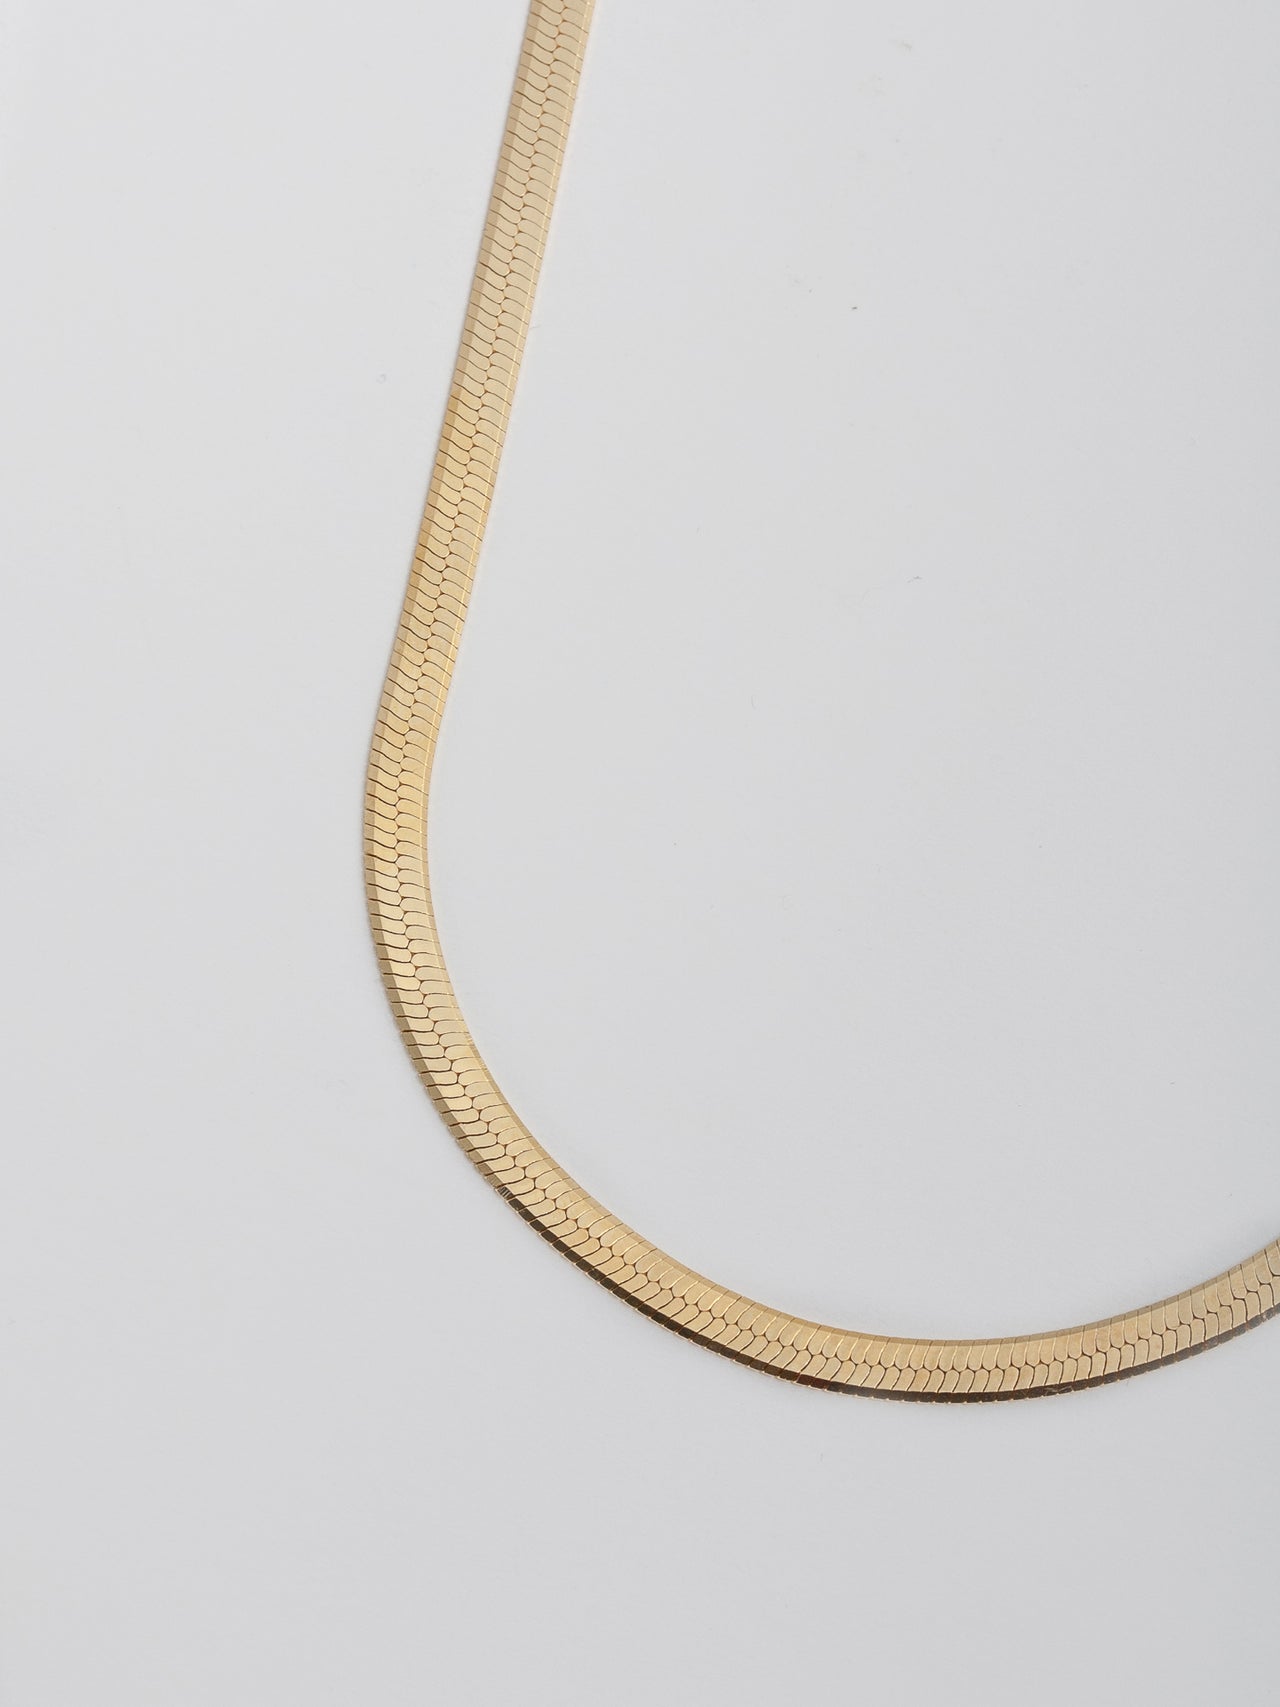 Vermeil Herringbone Chain Necklace pictured close up on light grey background.